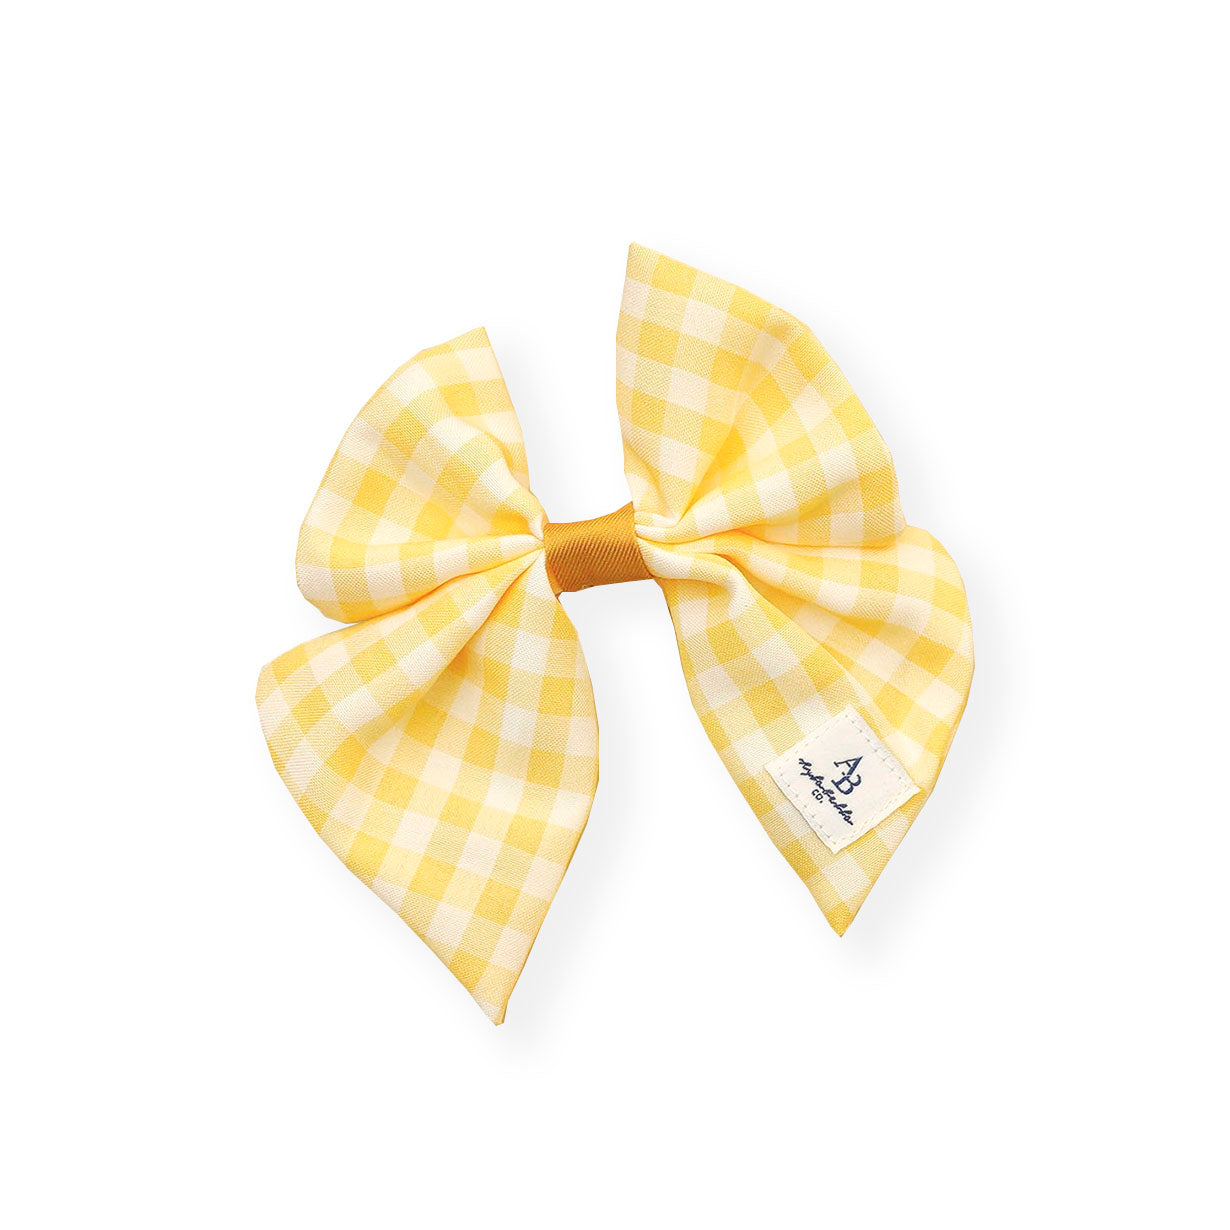 Sunkissed Dog Sailor Bow Tie